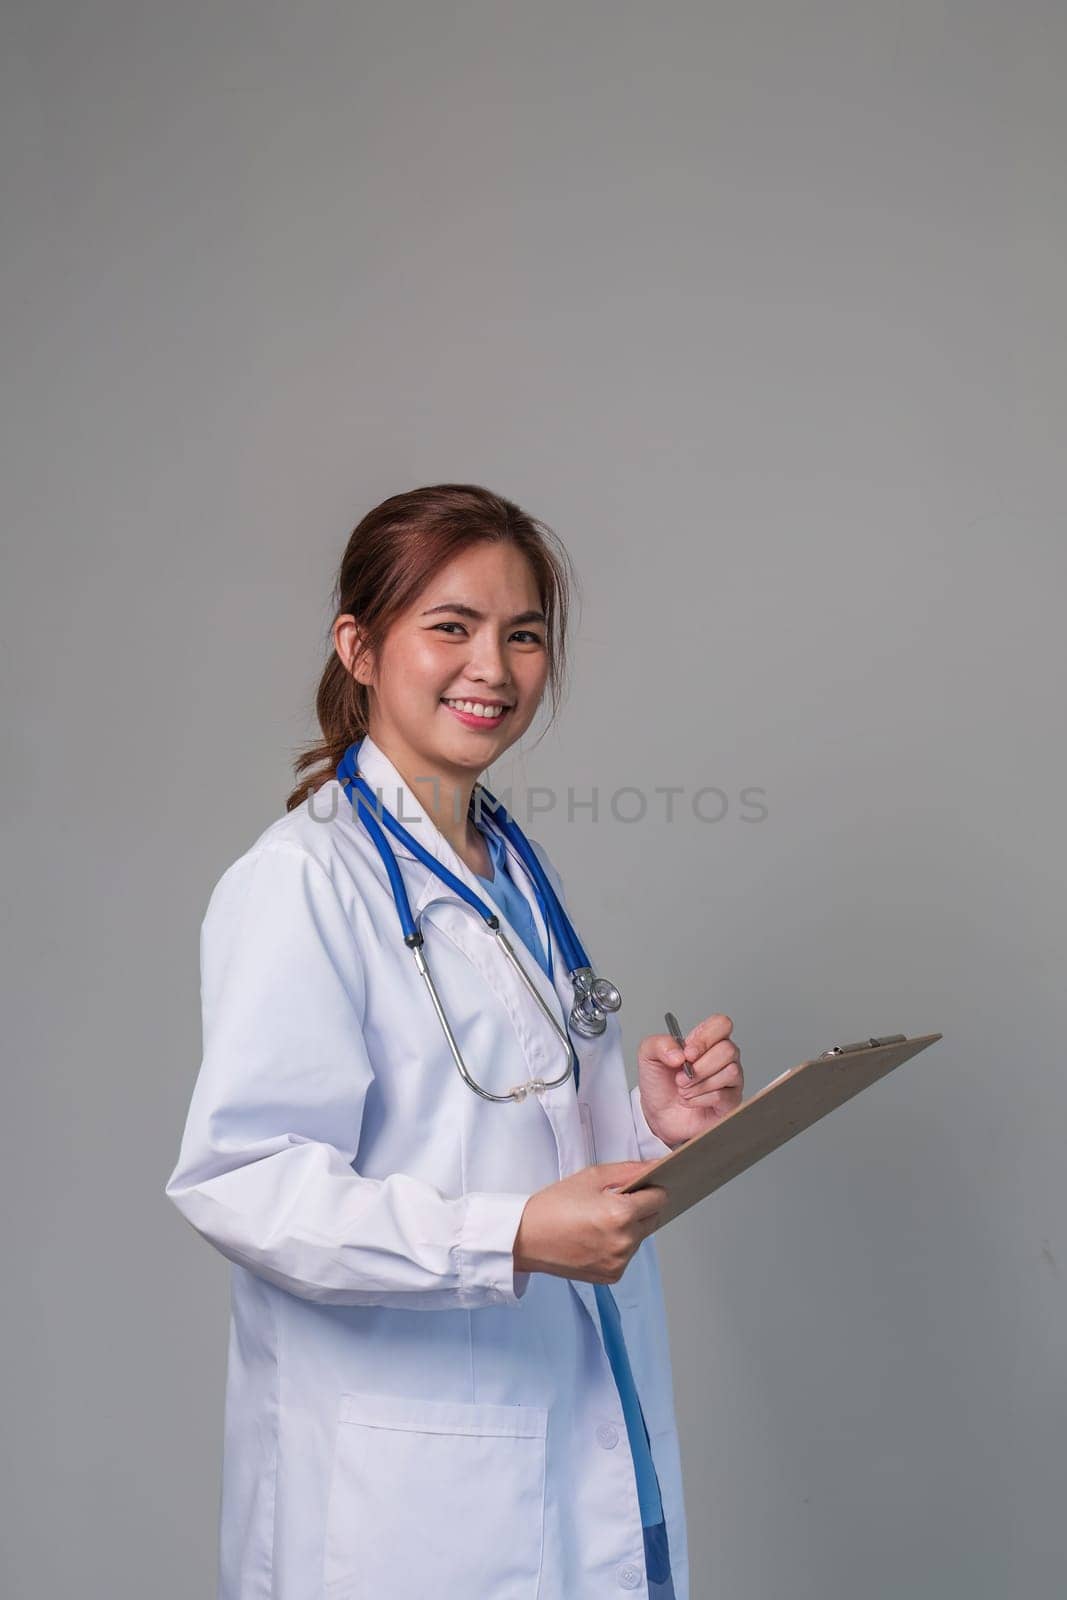 Portrait of a smiling female doctor holding a clipboard, wearing a medical coat and stethoscope, gray background. by wichayada